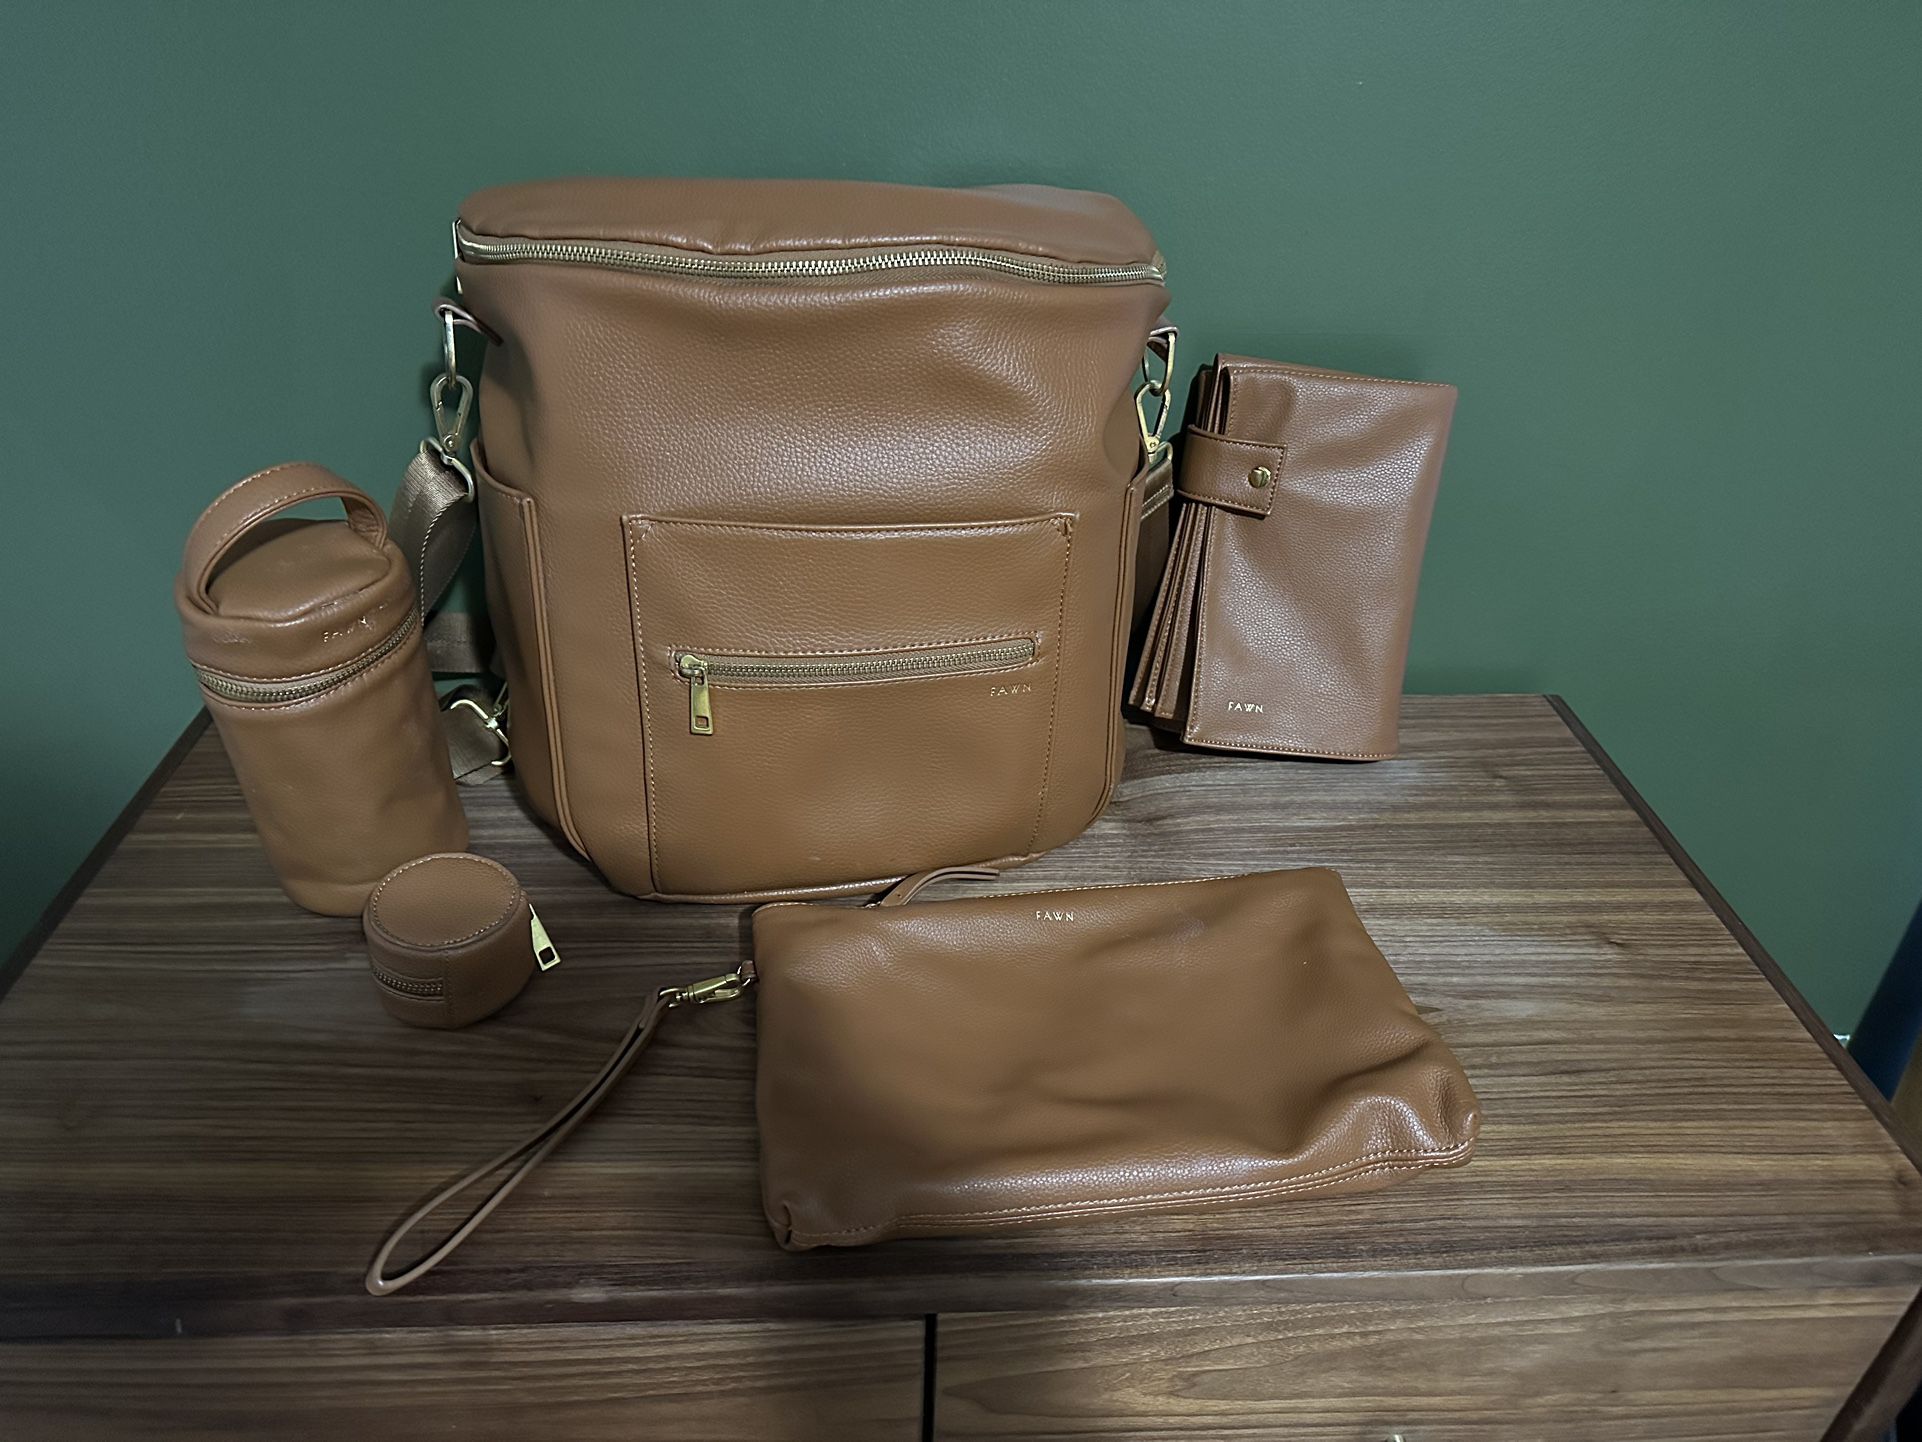 Fawn Design Diaper Bag And Accessories 